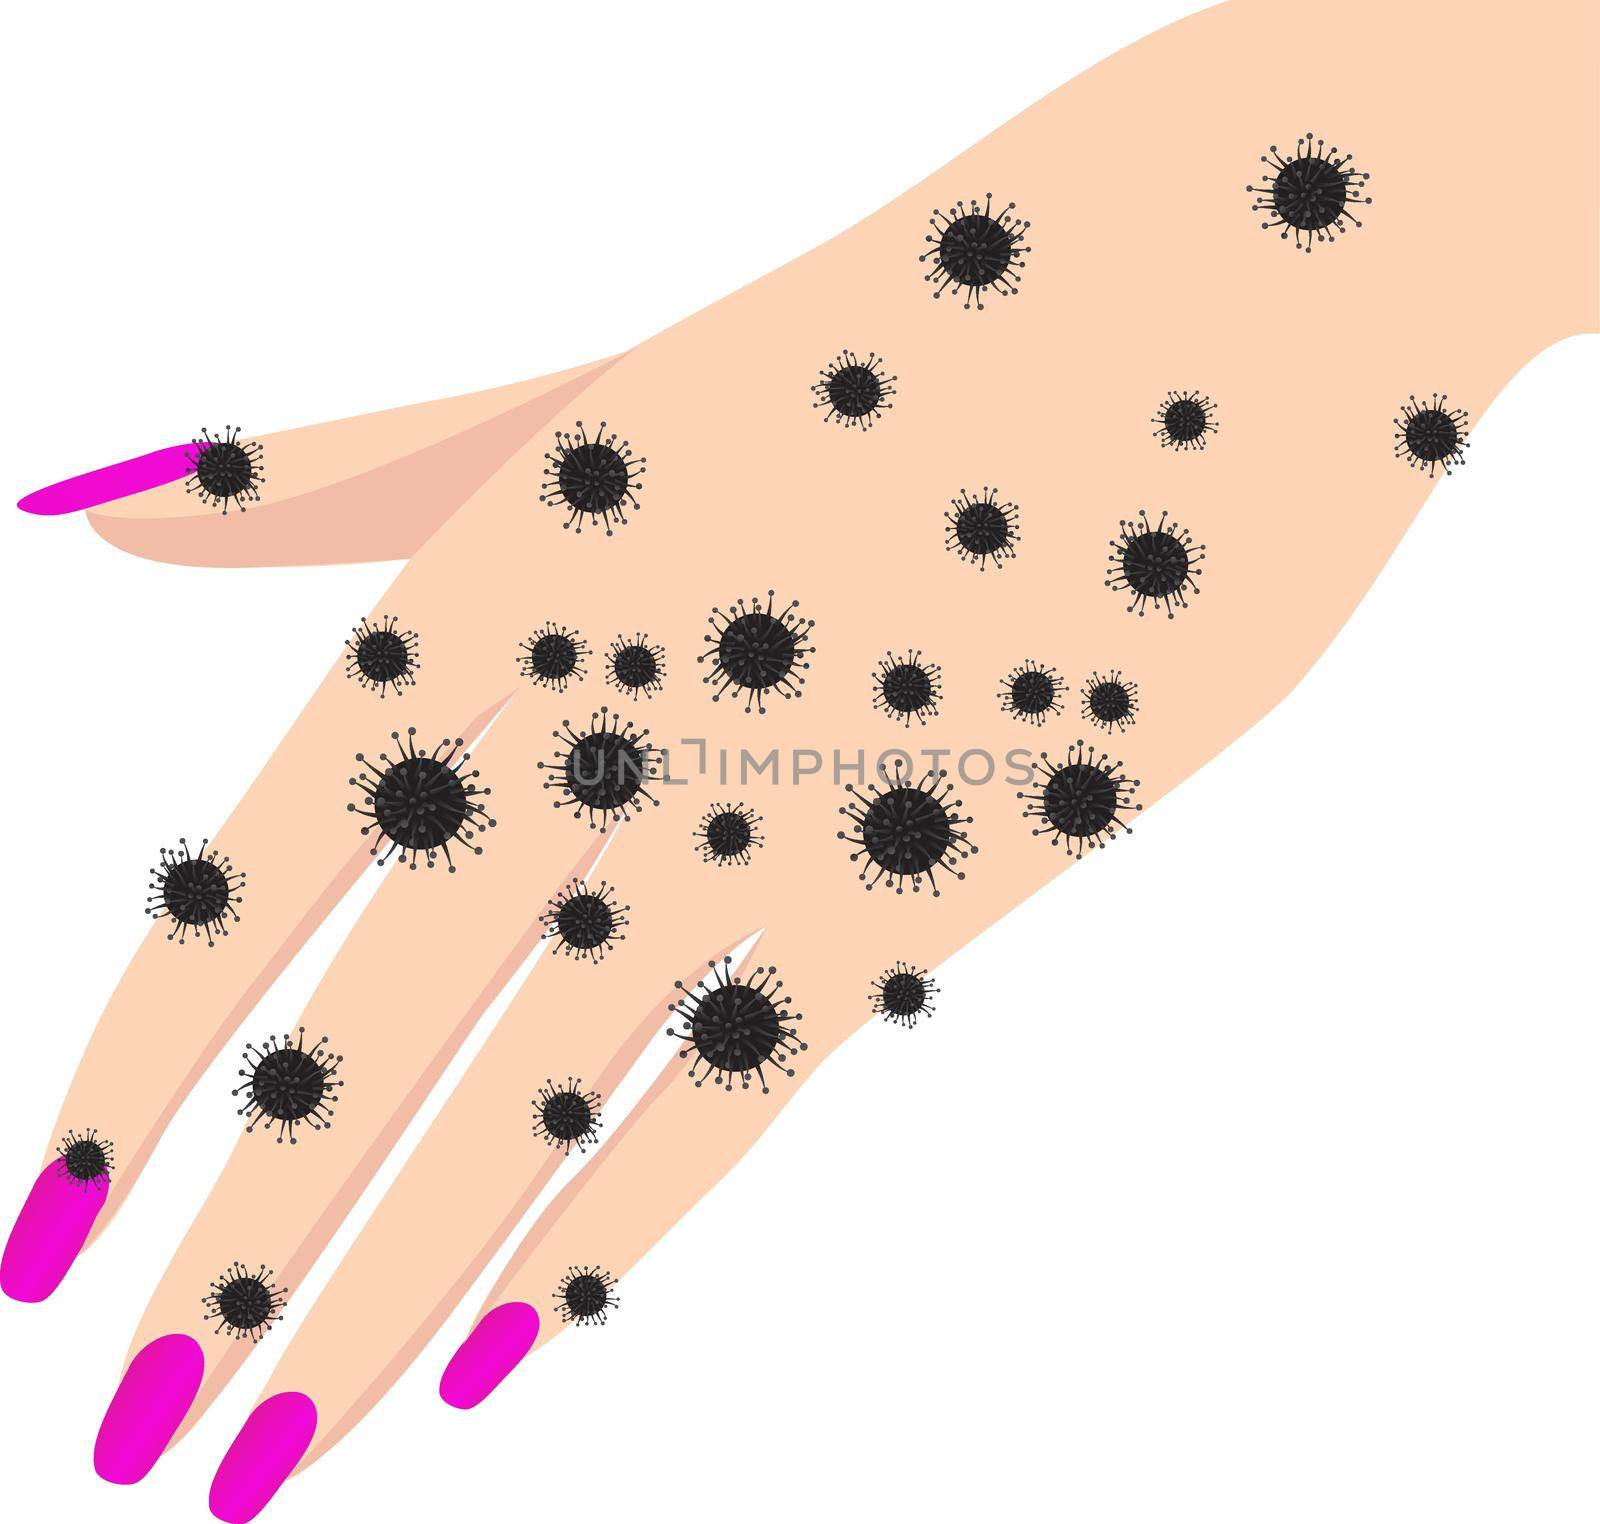 corona virus on hands antiseptic and disinfection concept vector illustration on a white background isolated